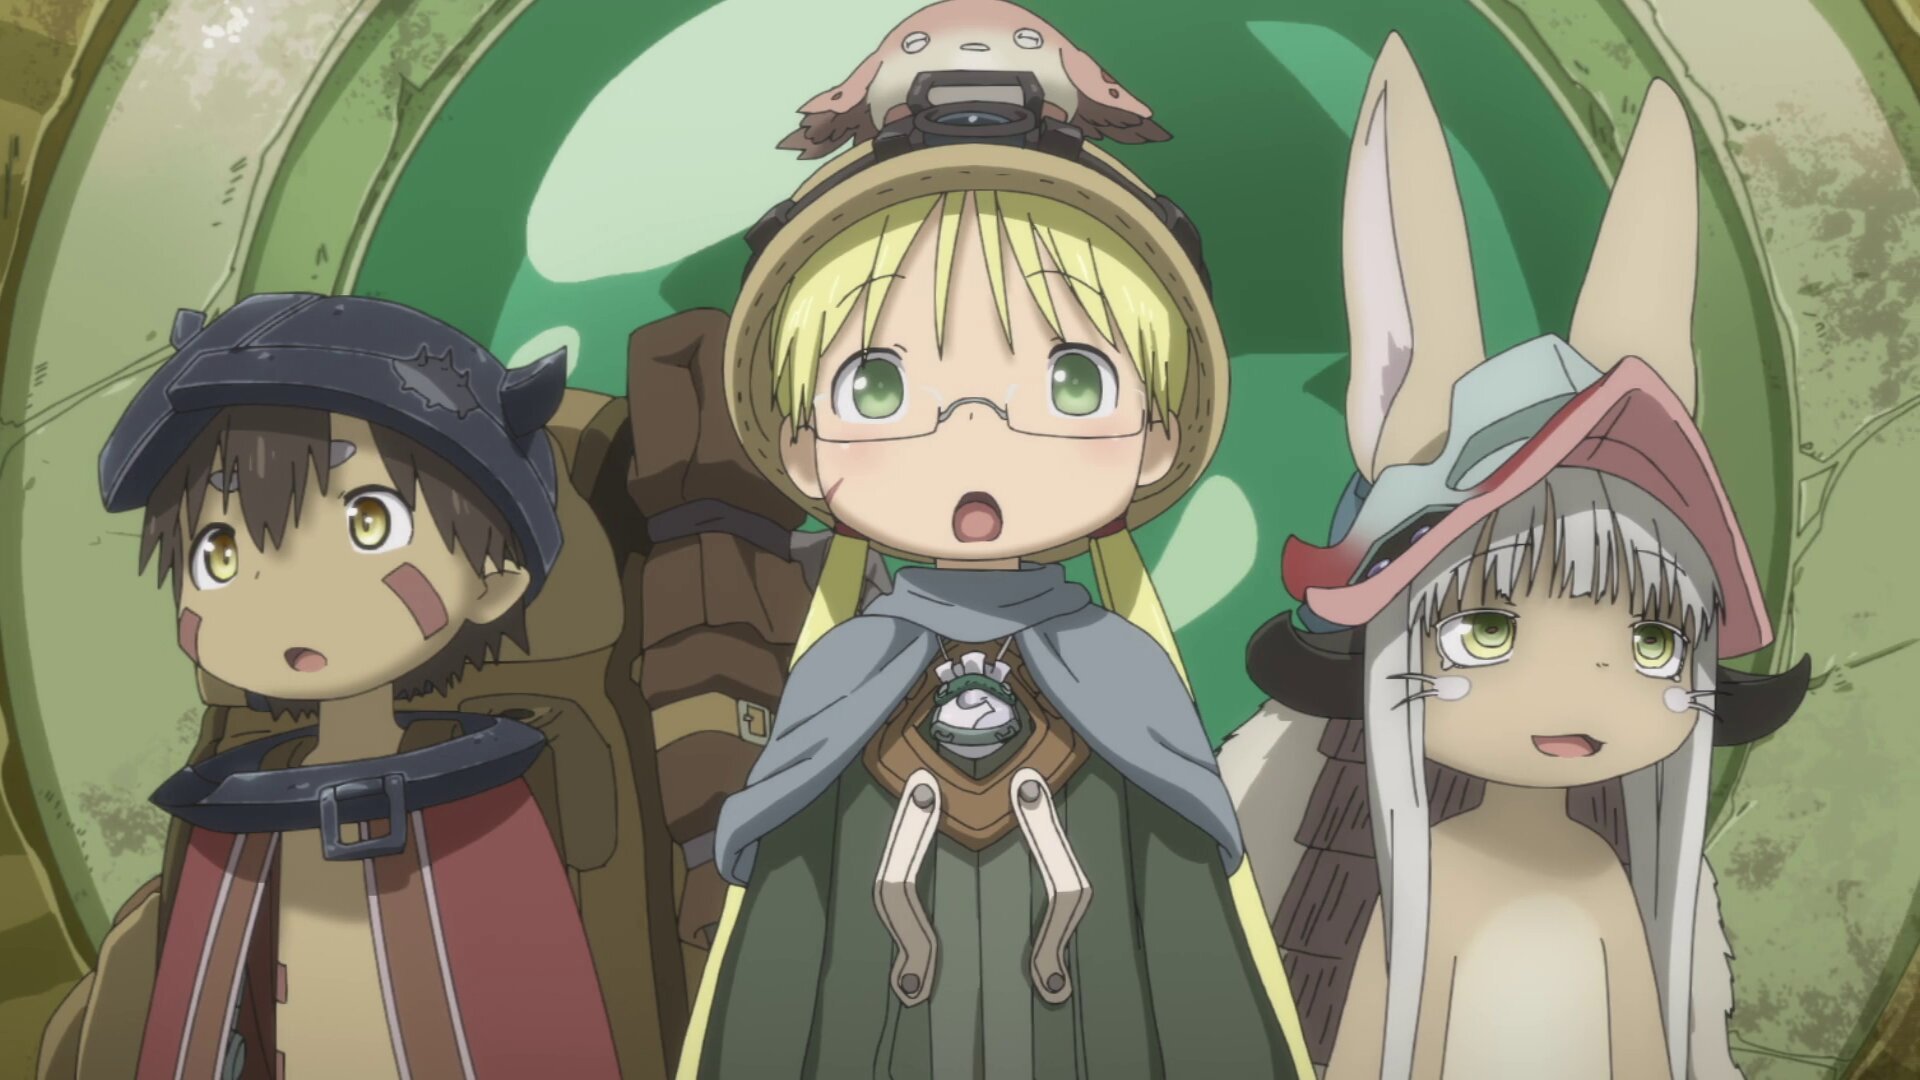 Stream Made In Abyss Season 2 The Golden City of the Scorching Sun